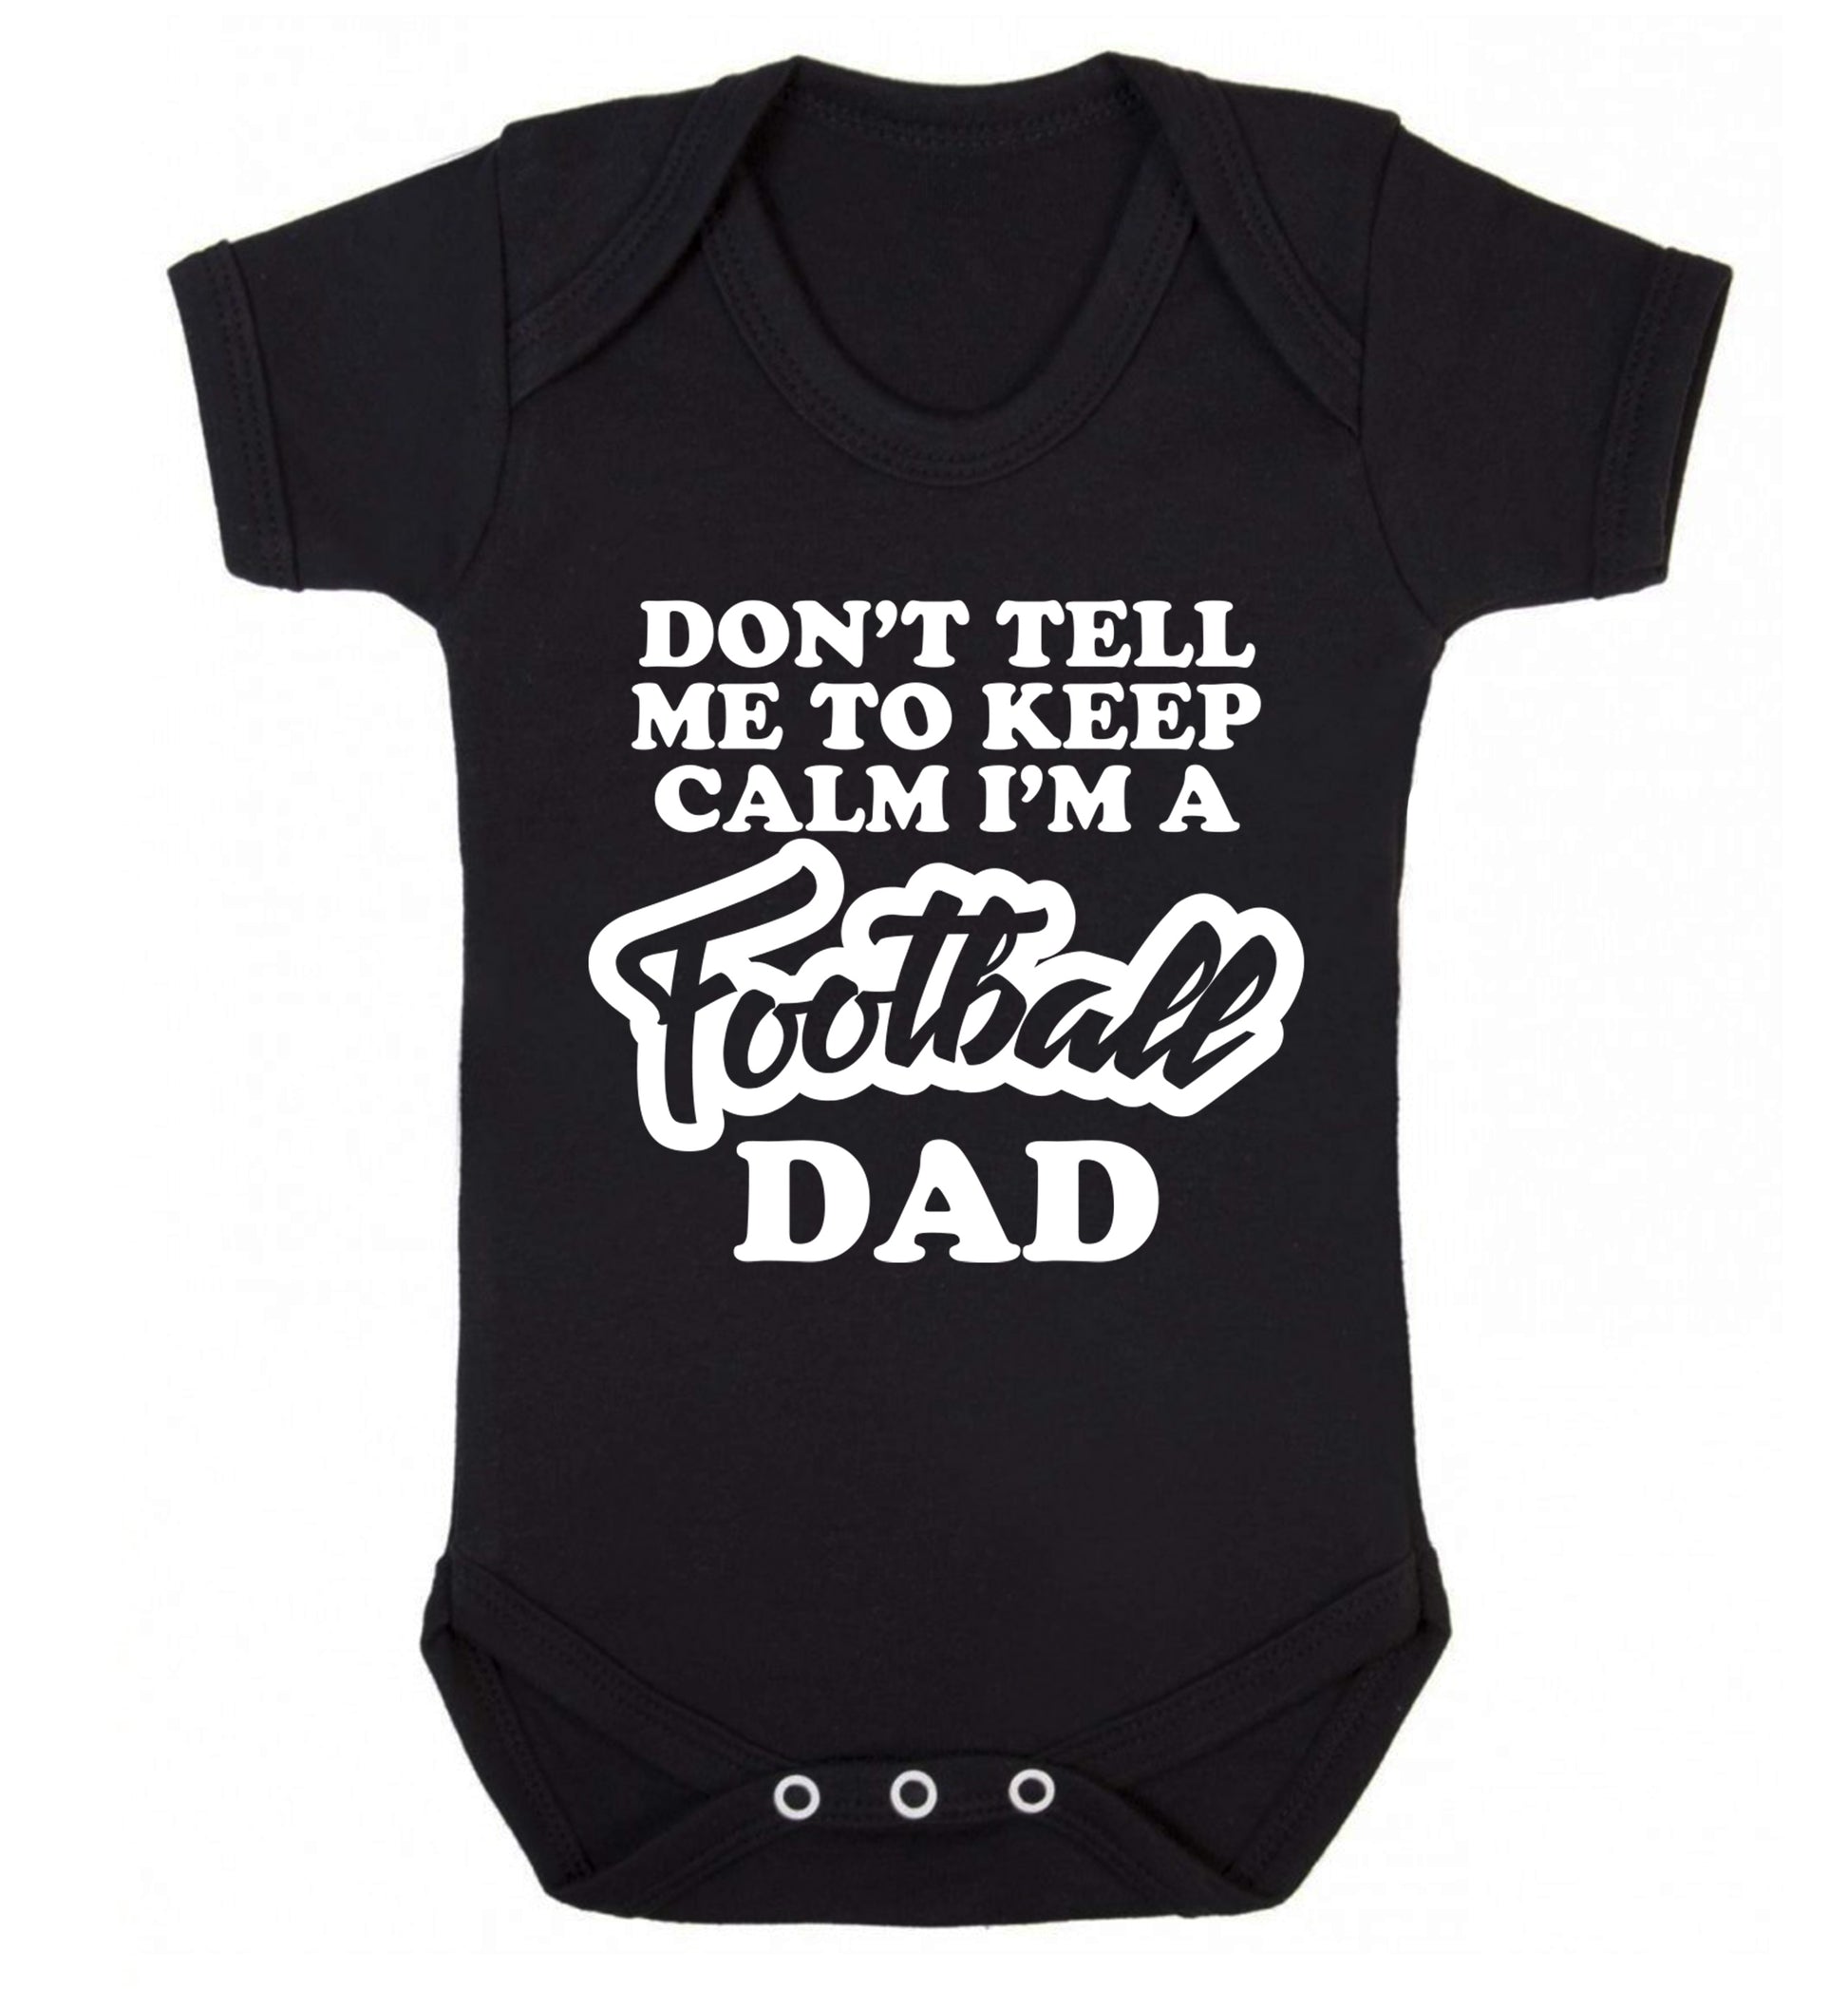 Don't tell me to keep calm I'm a football dad Baby Vest black 18-24 months